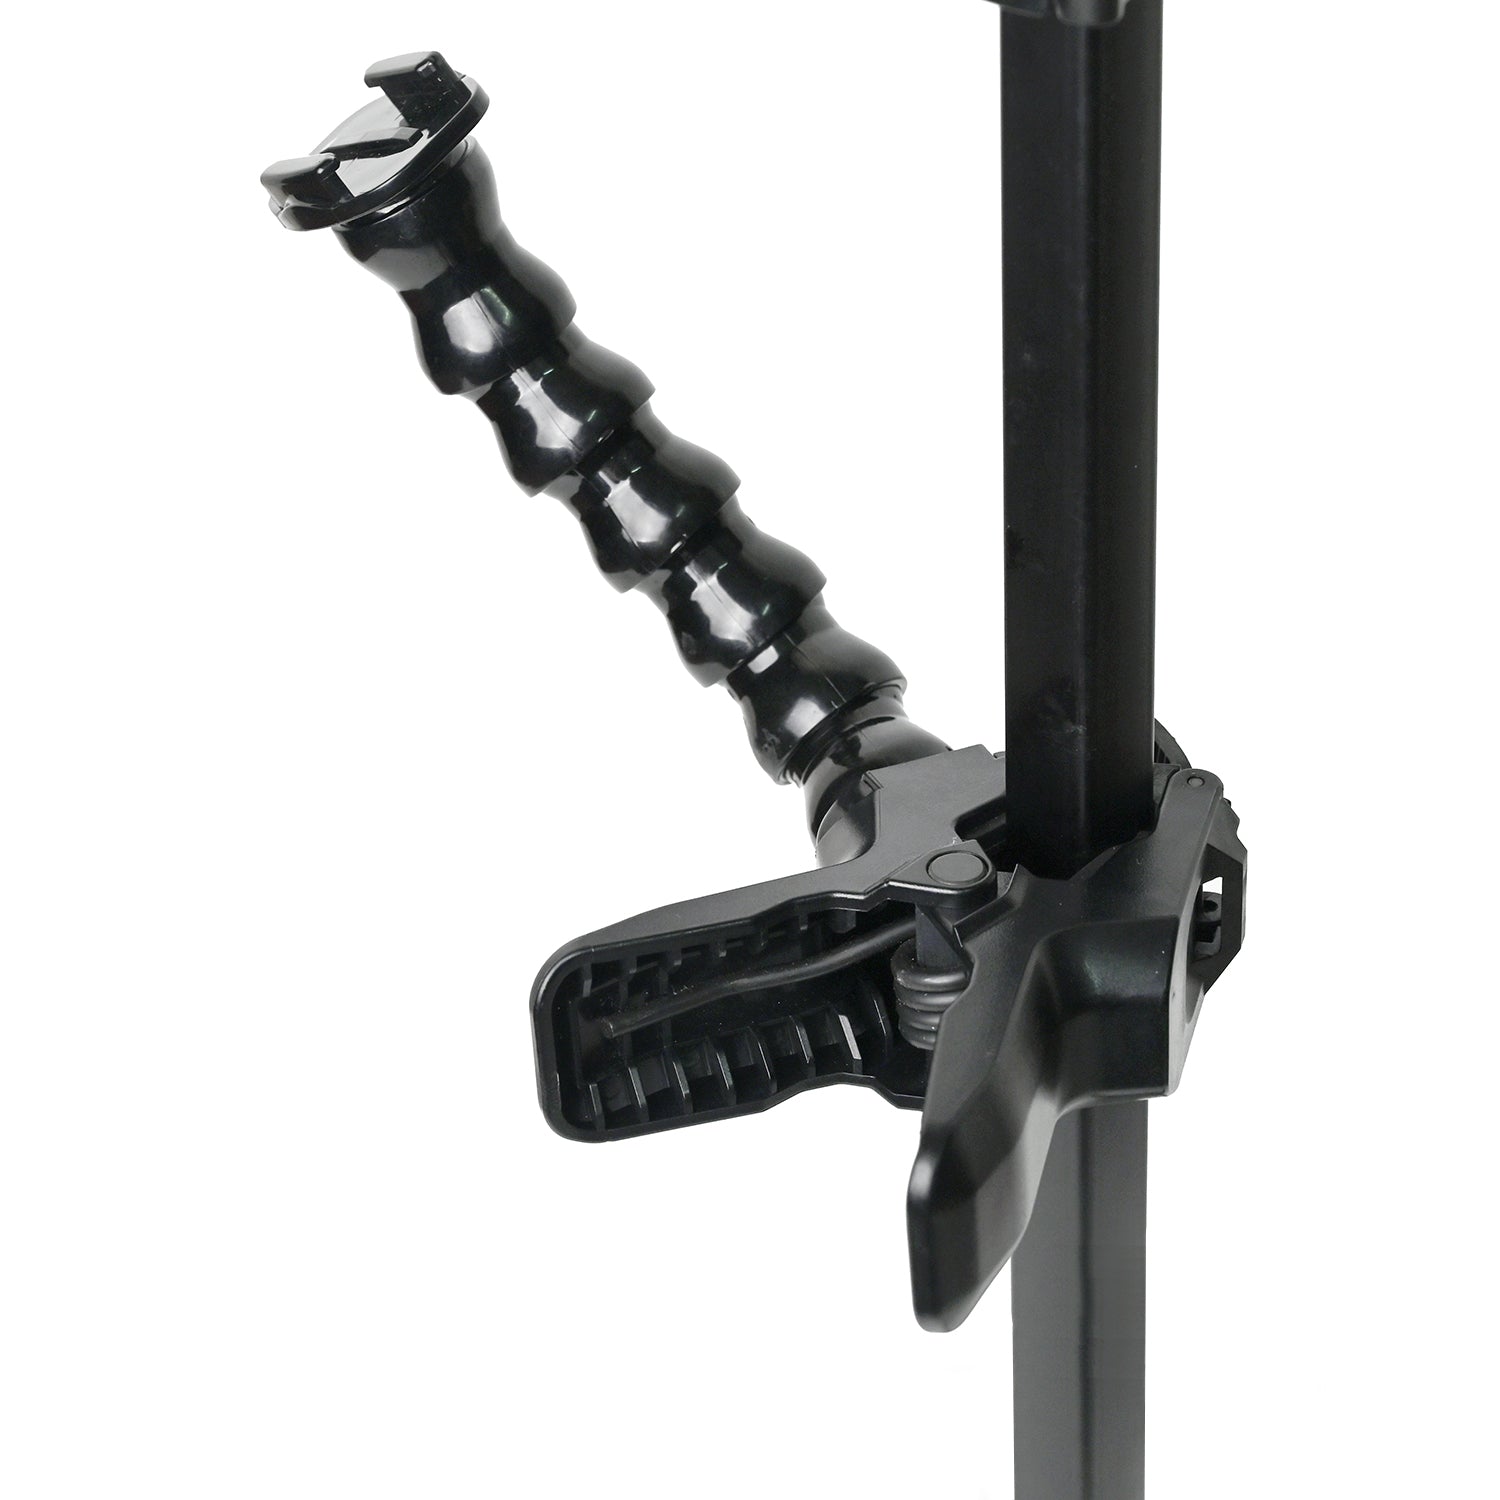 Jaws Clamp For Actioncam